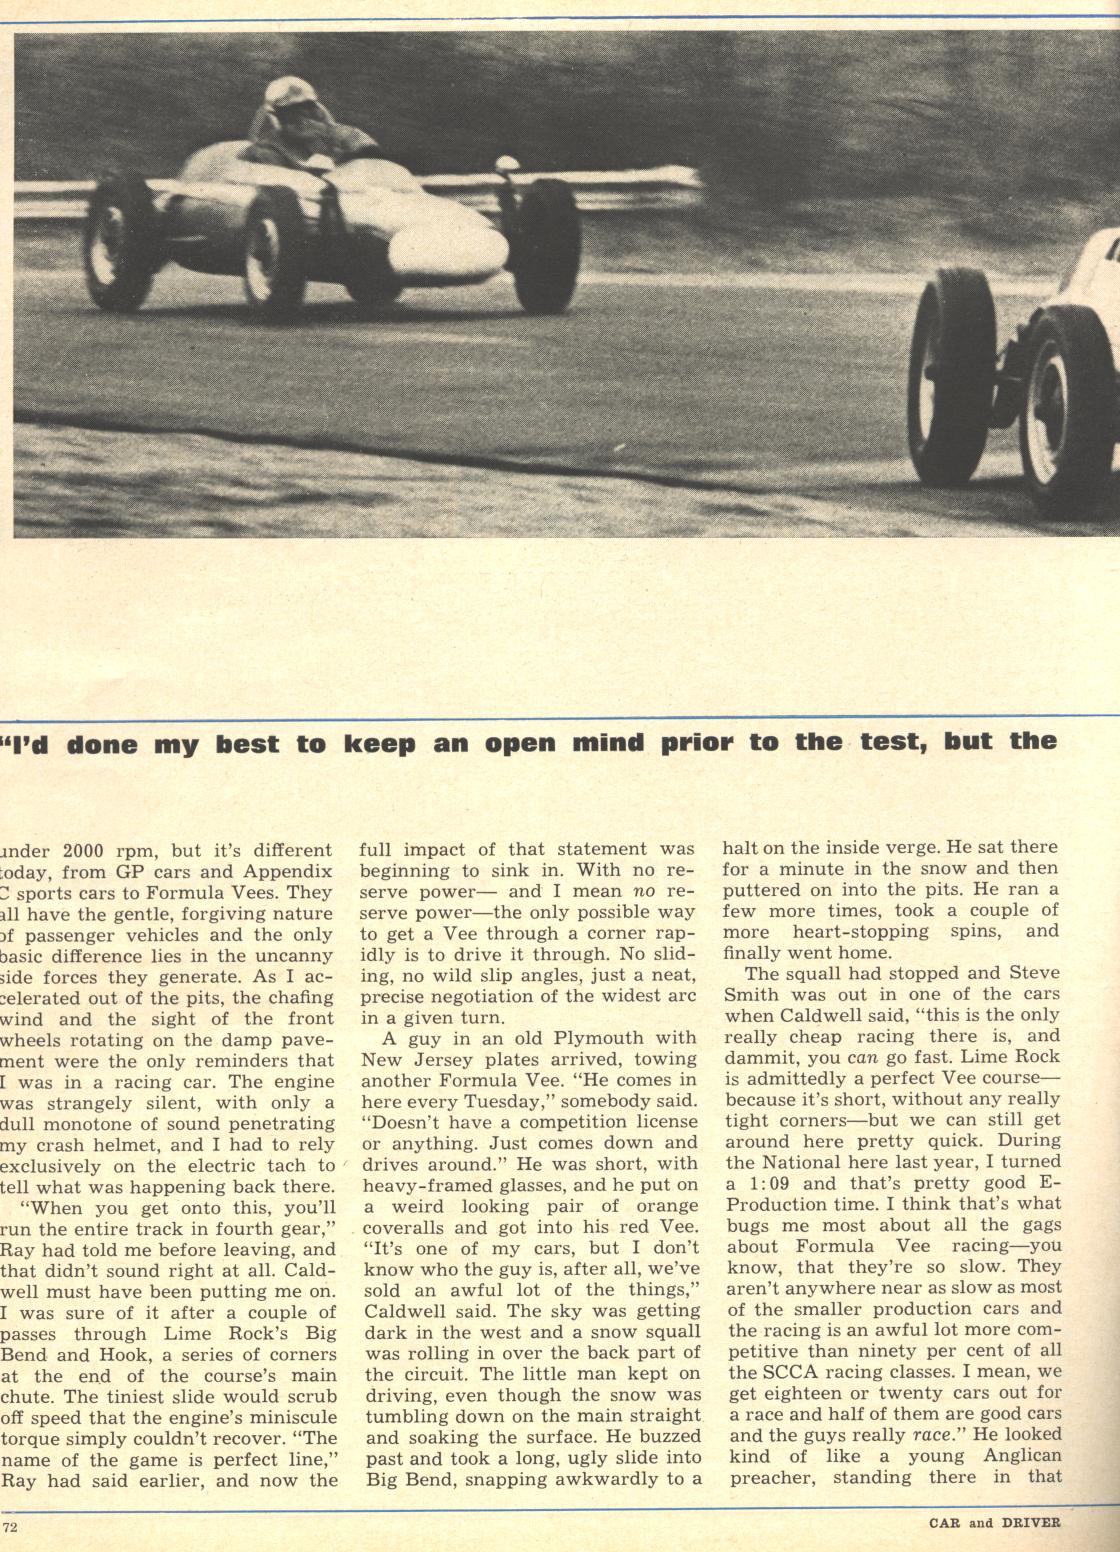 Car and driver Article page 2